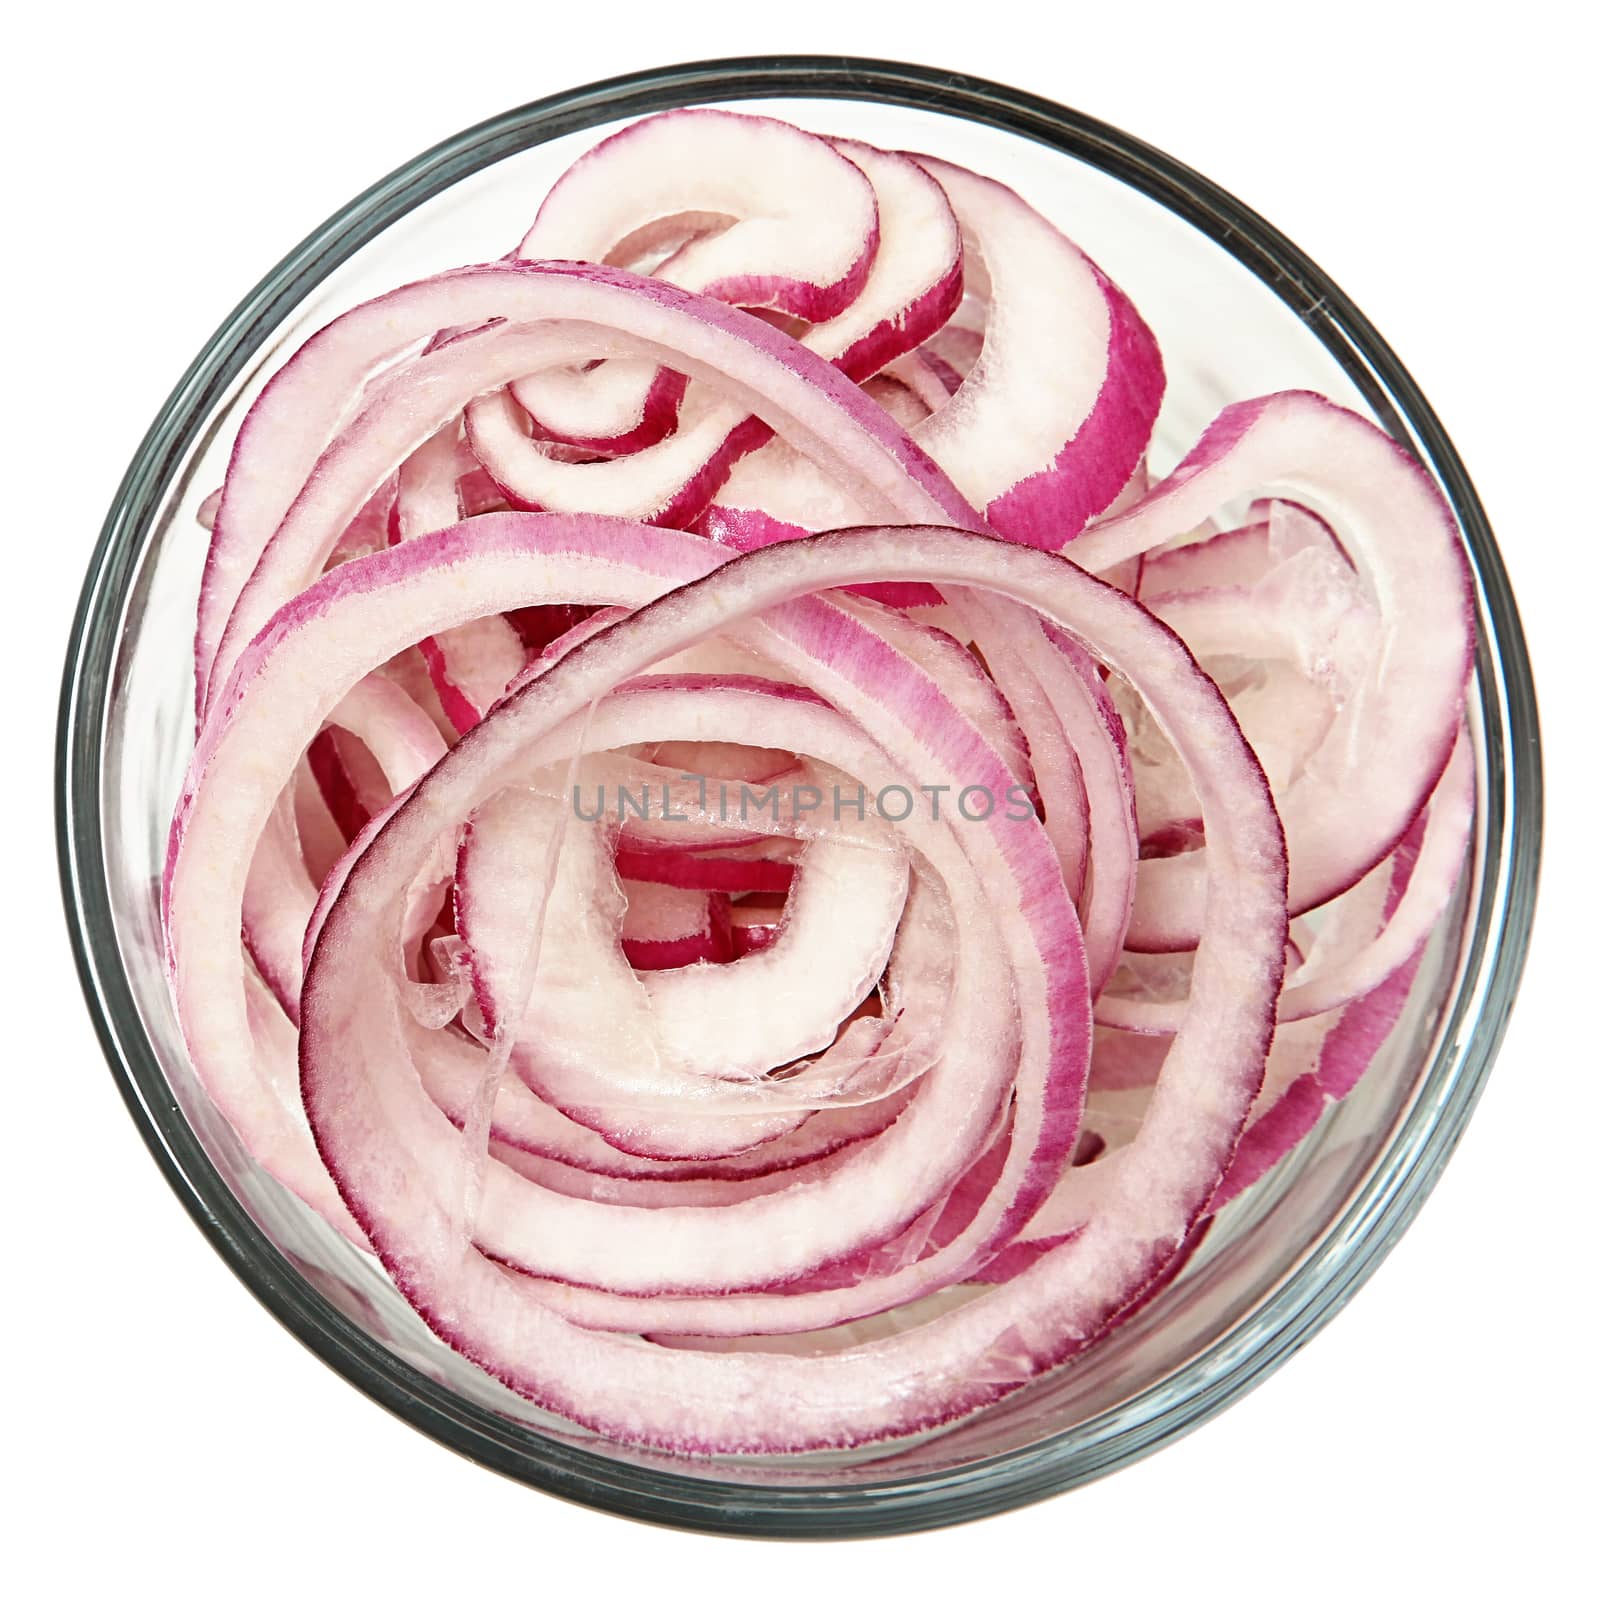 Sliced Purple Onion Rings in Glass Bowl Over White by duplass